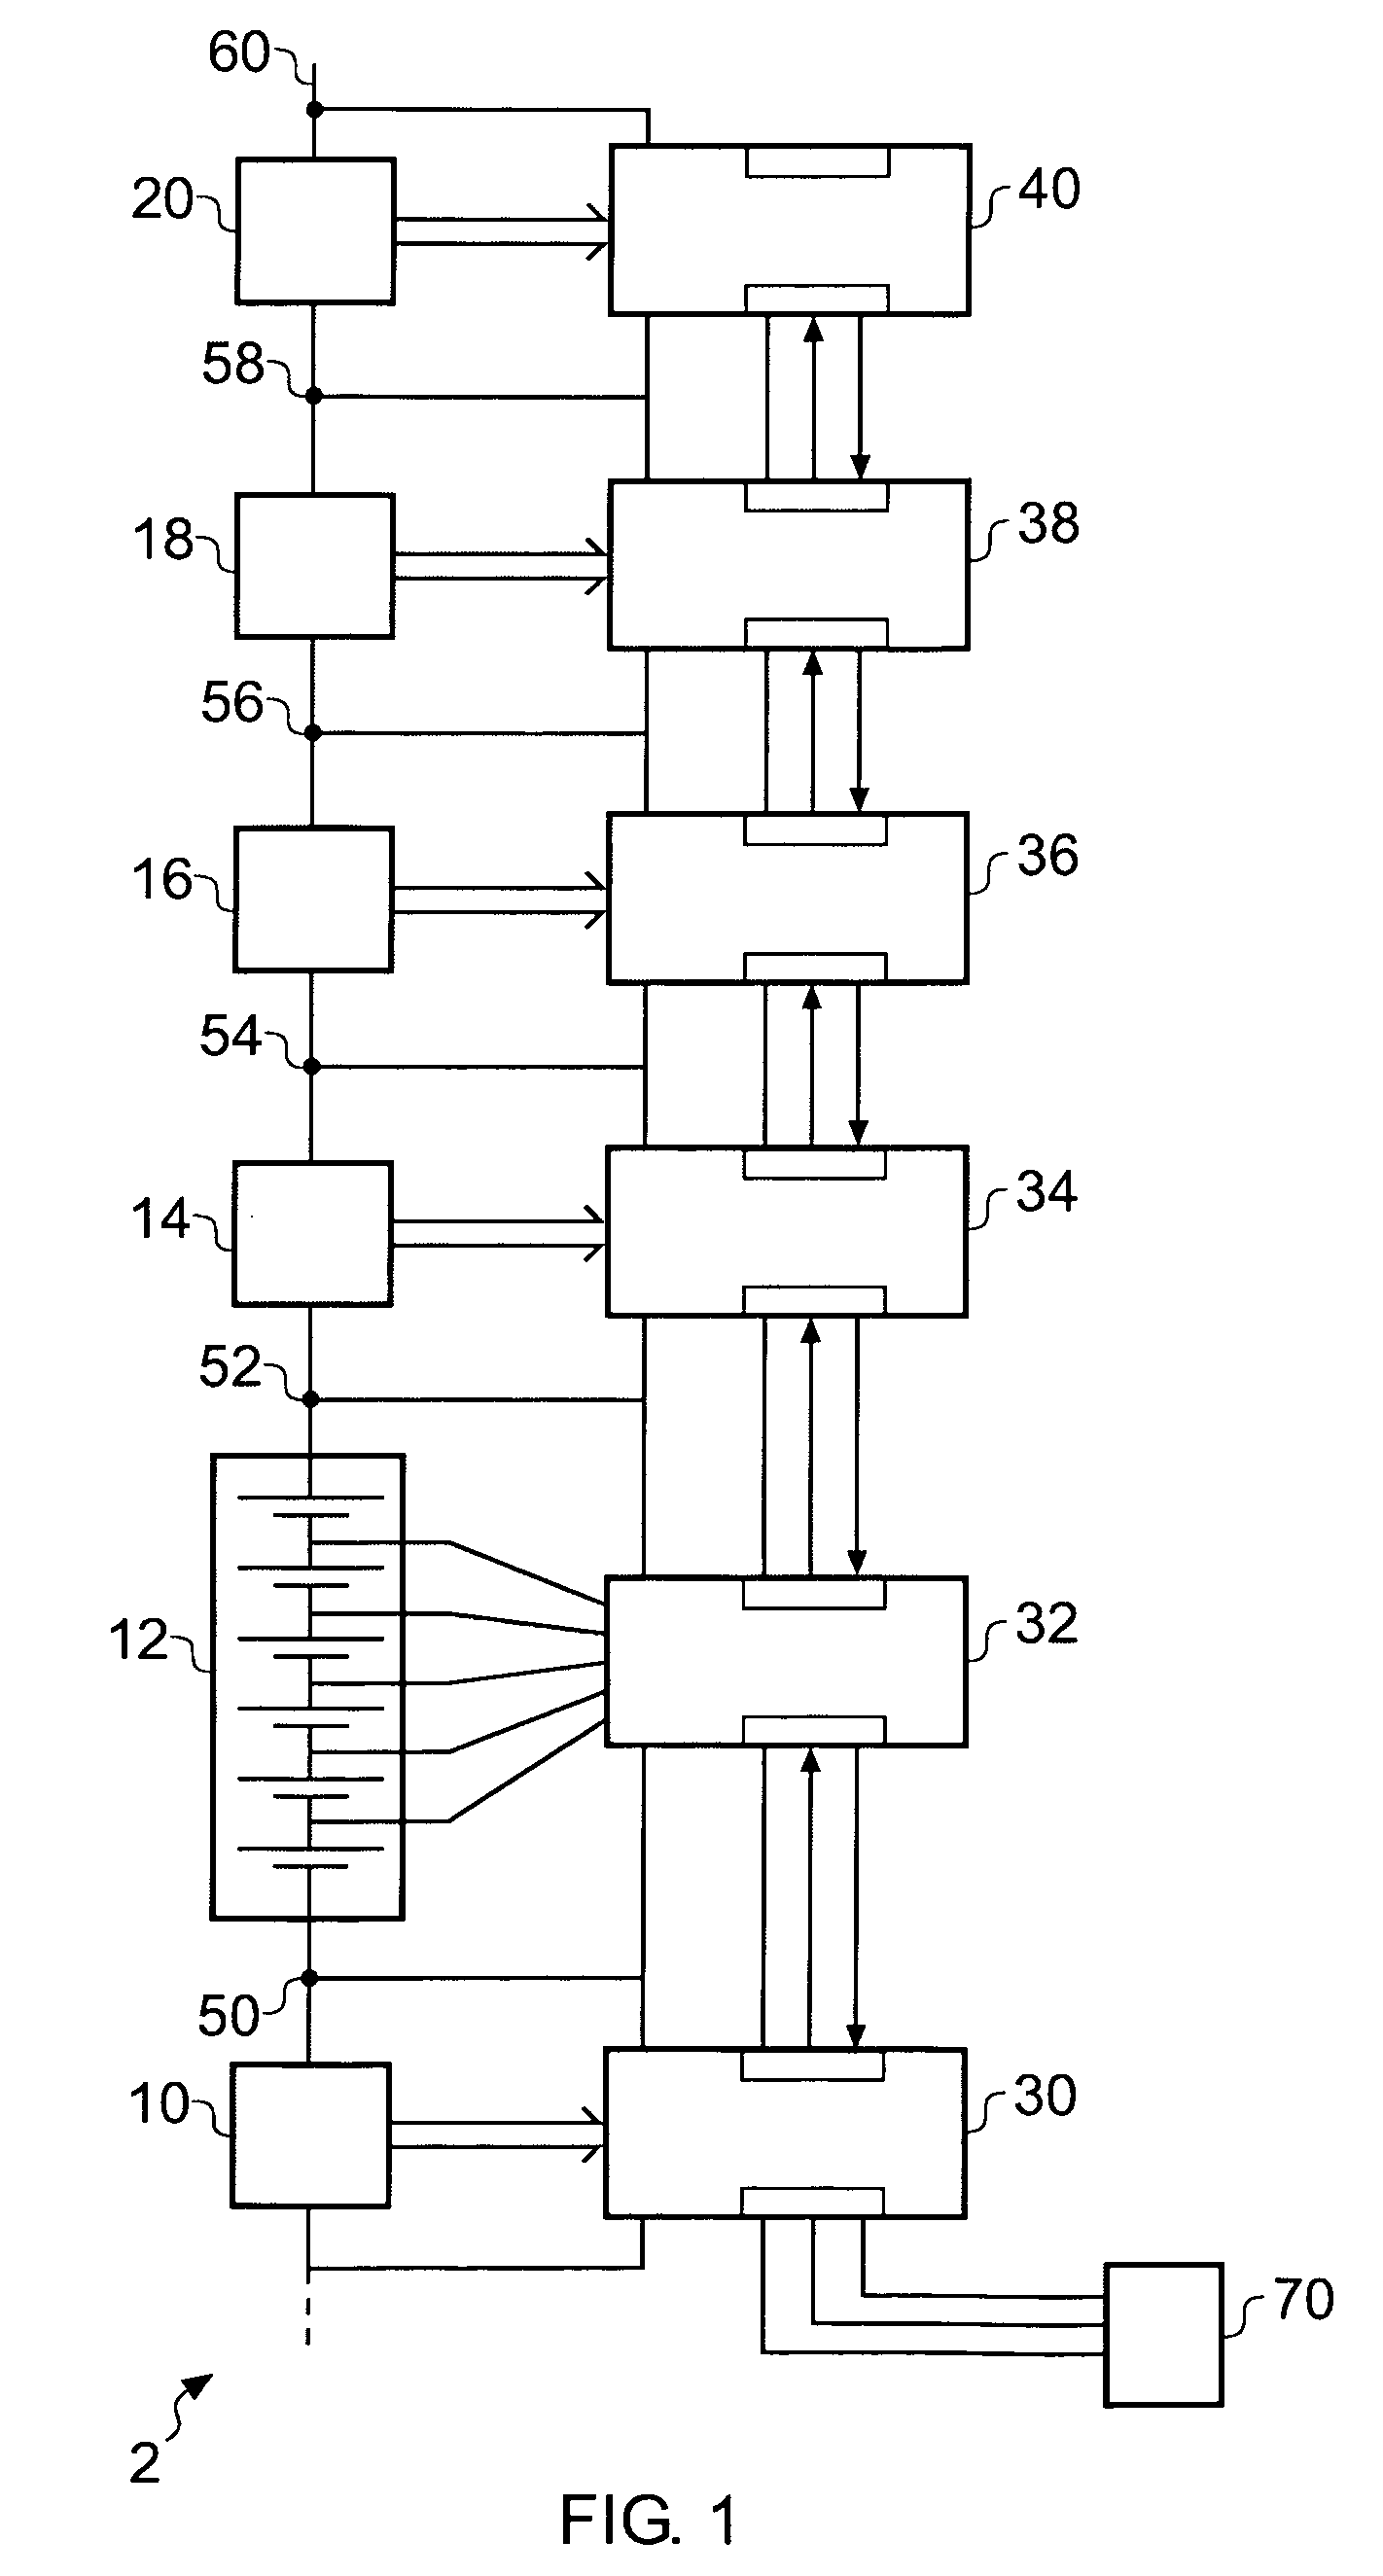 Battery montoring apparatus and daisy chain interface suitable for use in a battery monitoring apparatus